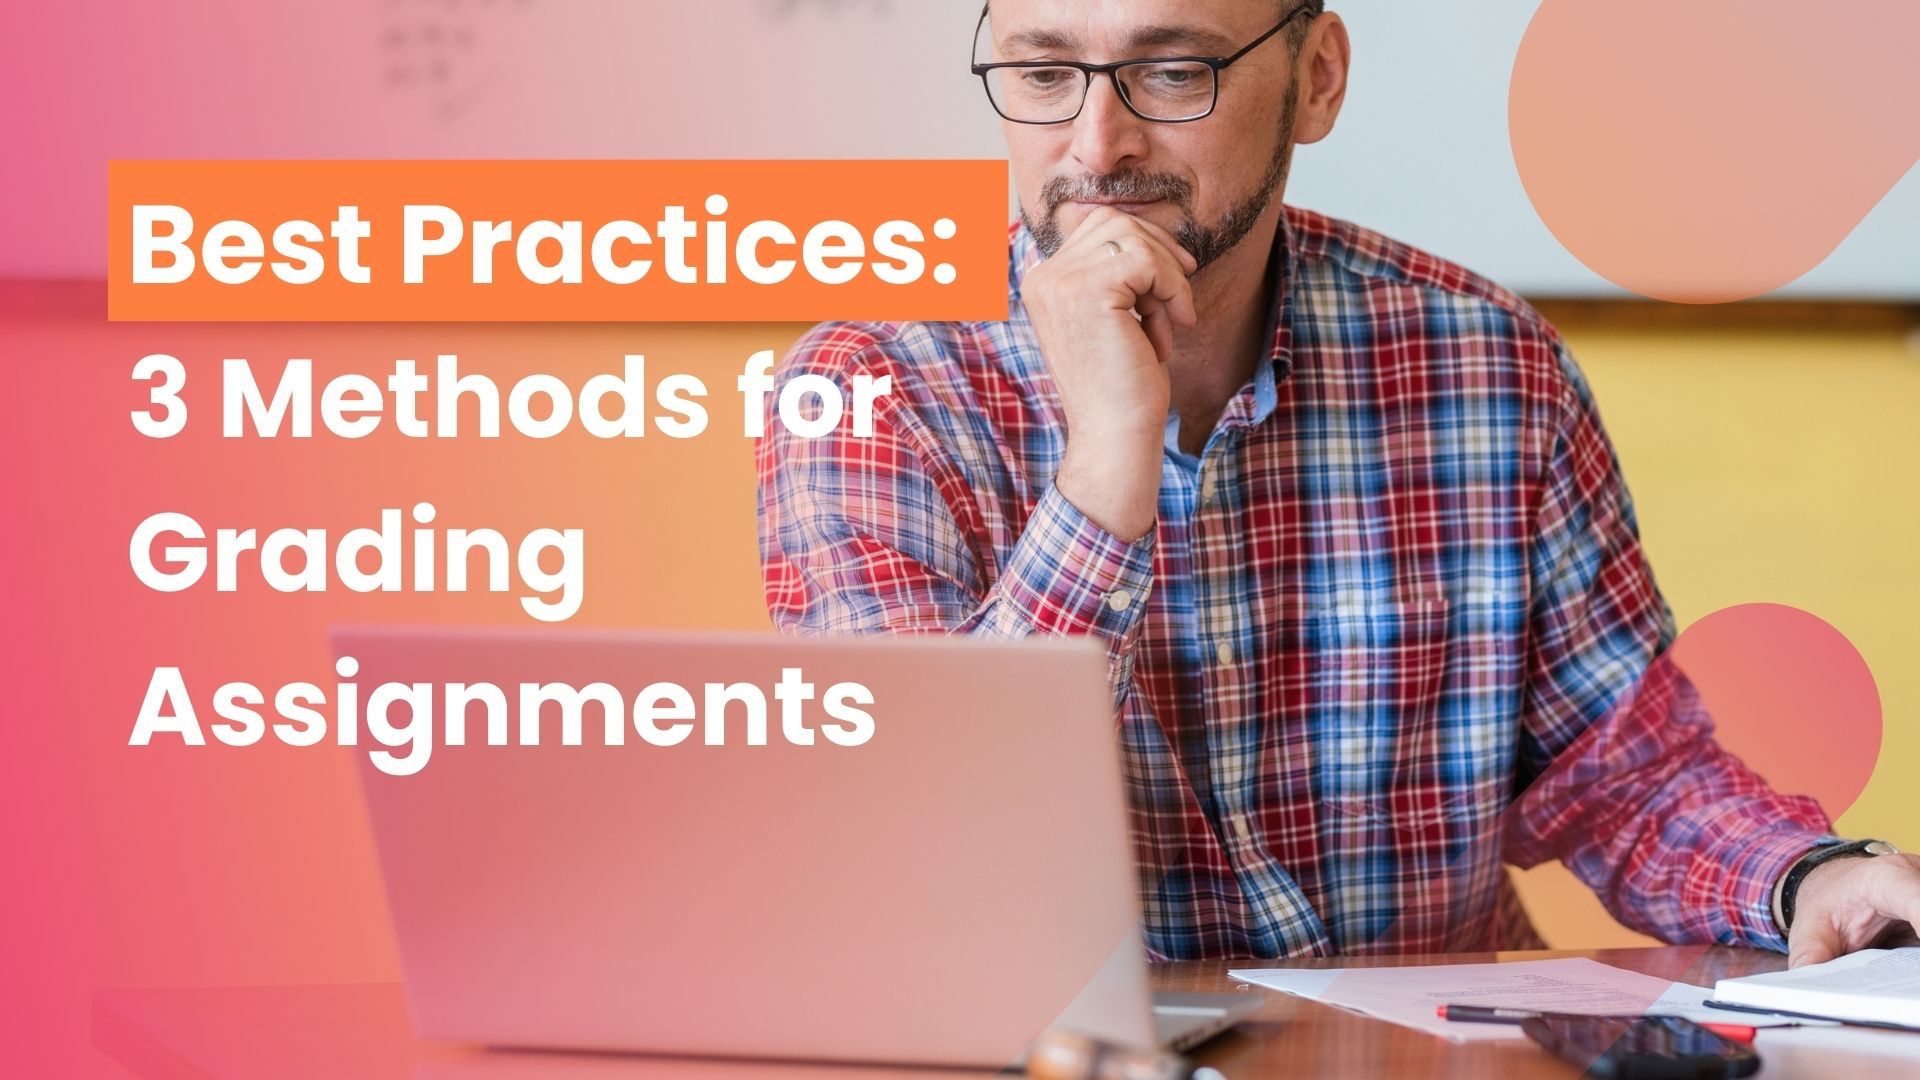 Best Practices: 3 Methods for Grading Assignments